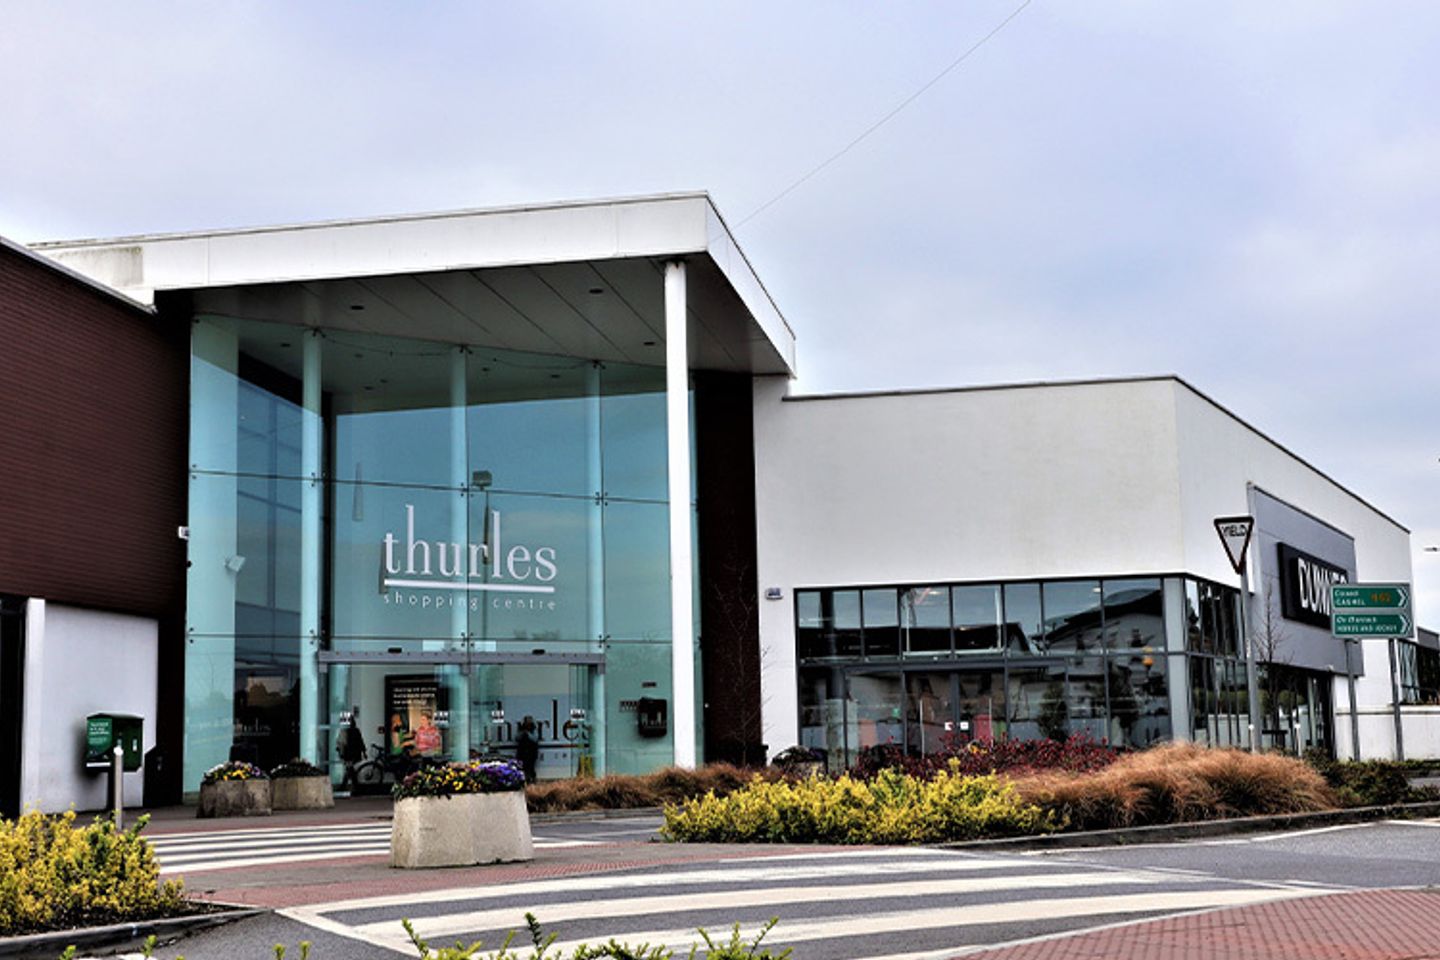 Thurles Shopping Centre, Thurles, Co. Tipperary